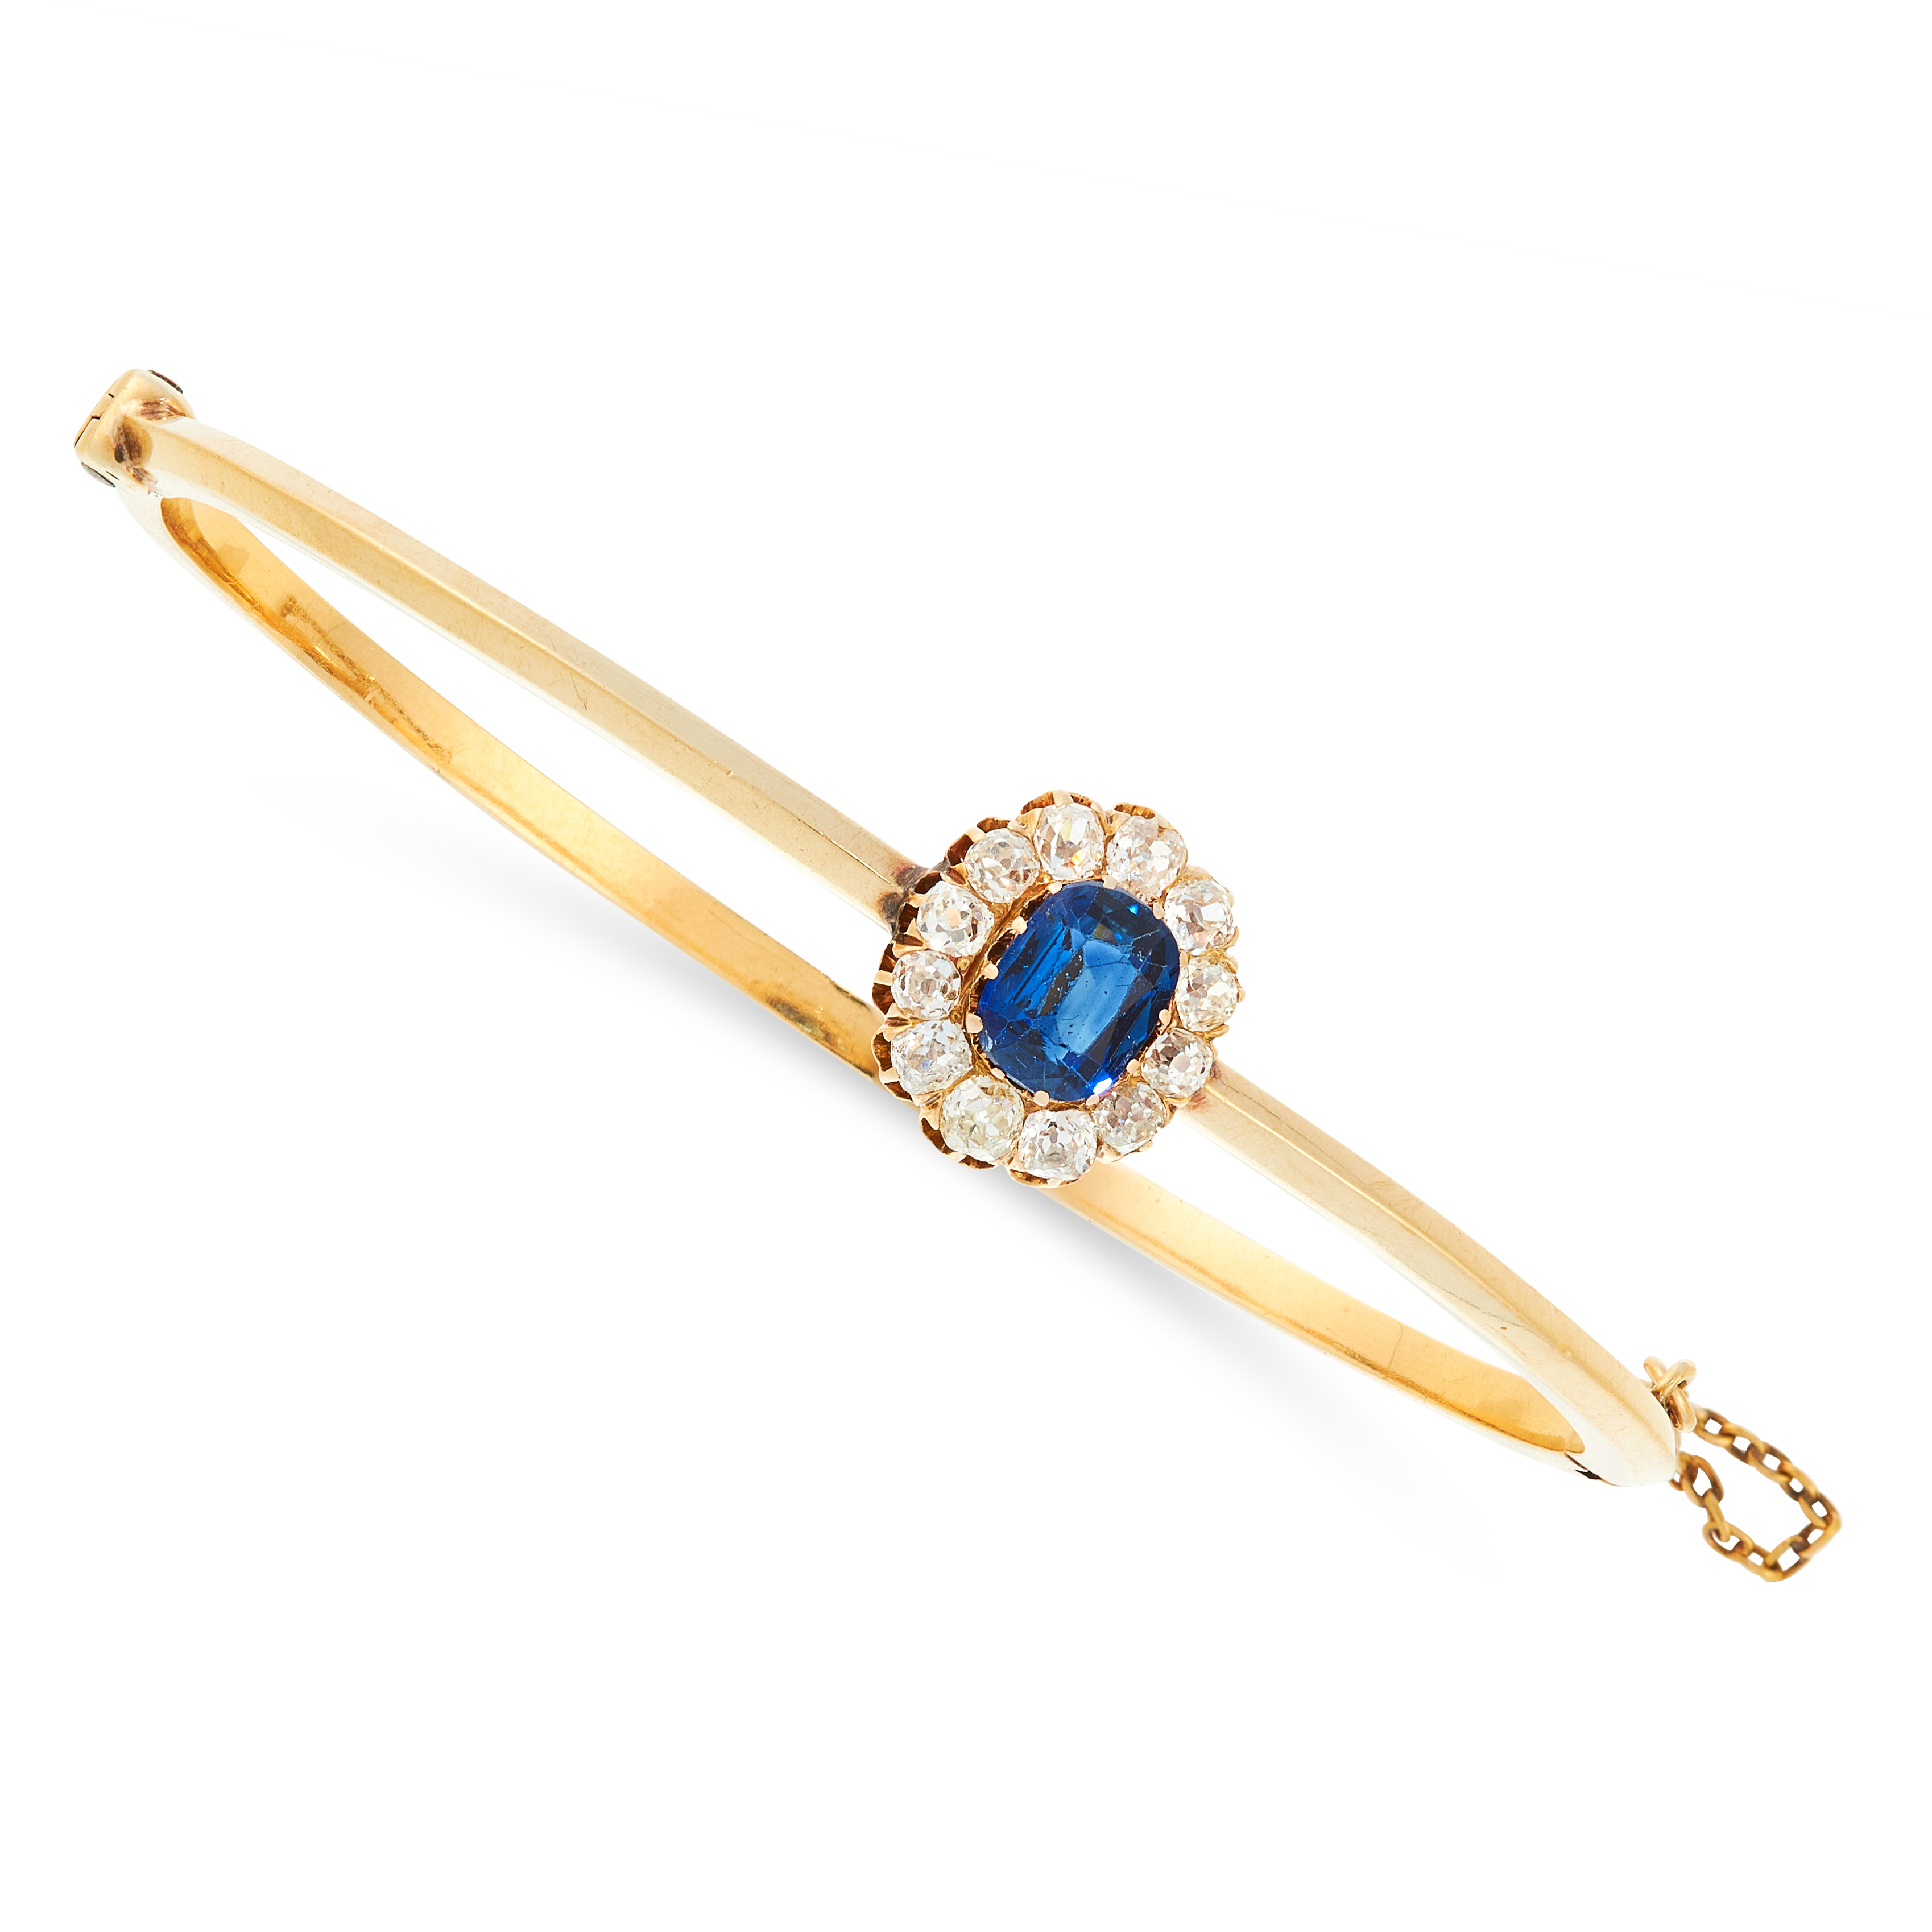 AN ANTIQUE SAPPHIRE AND DIAMOND BANGLE in high carat yellow gold, set with a cushion cut blue